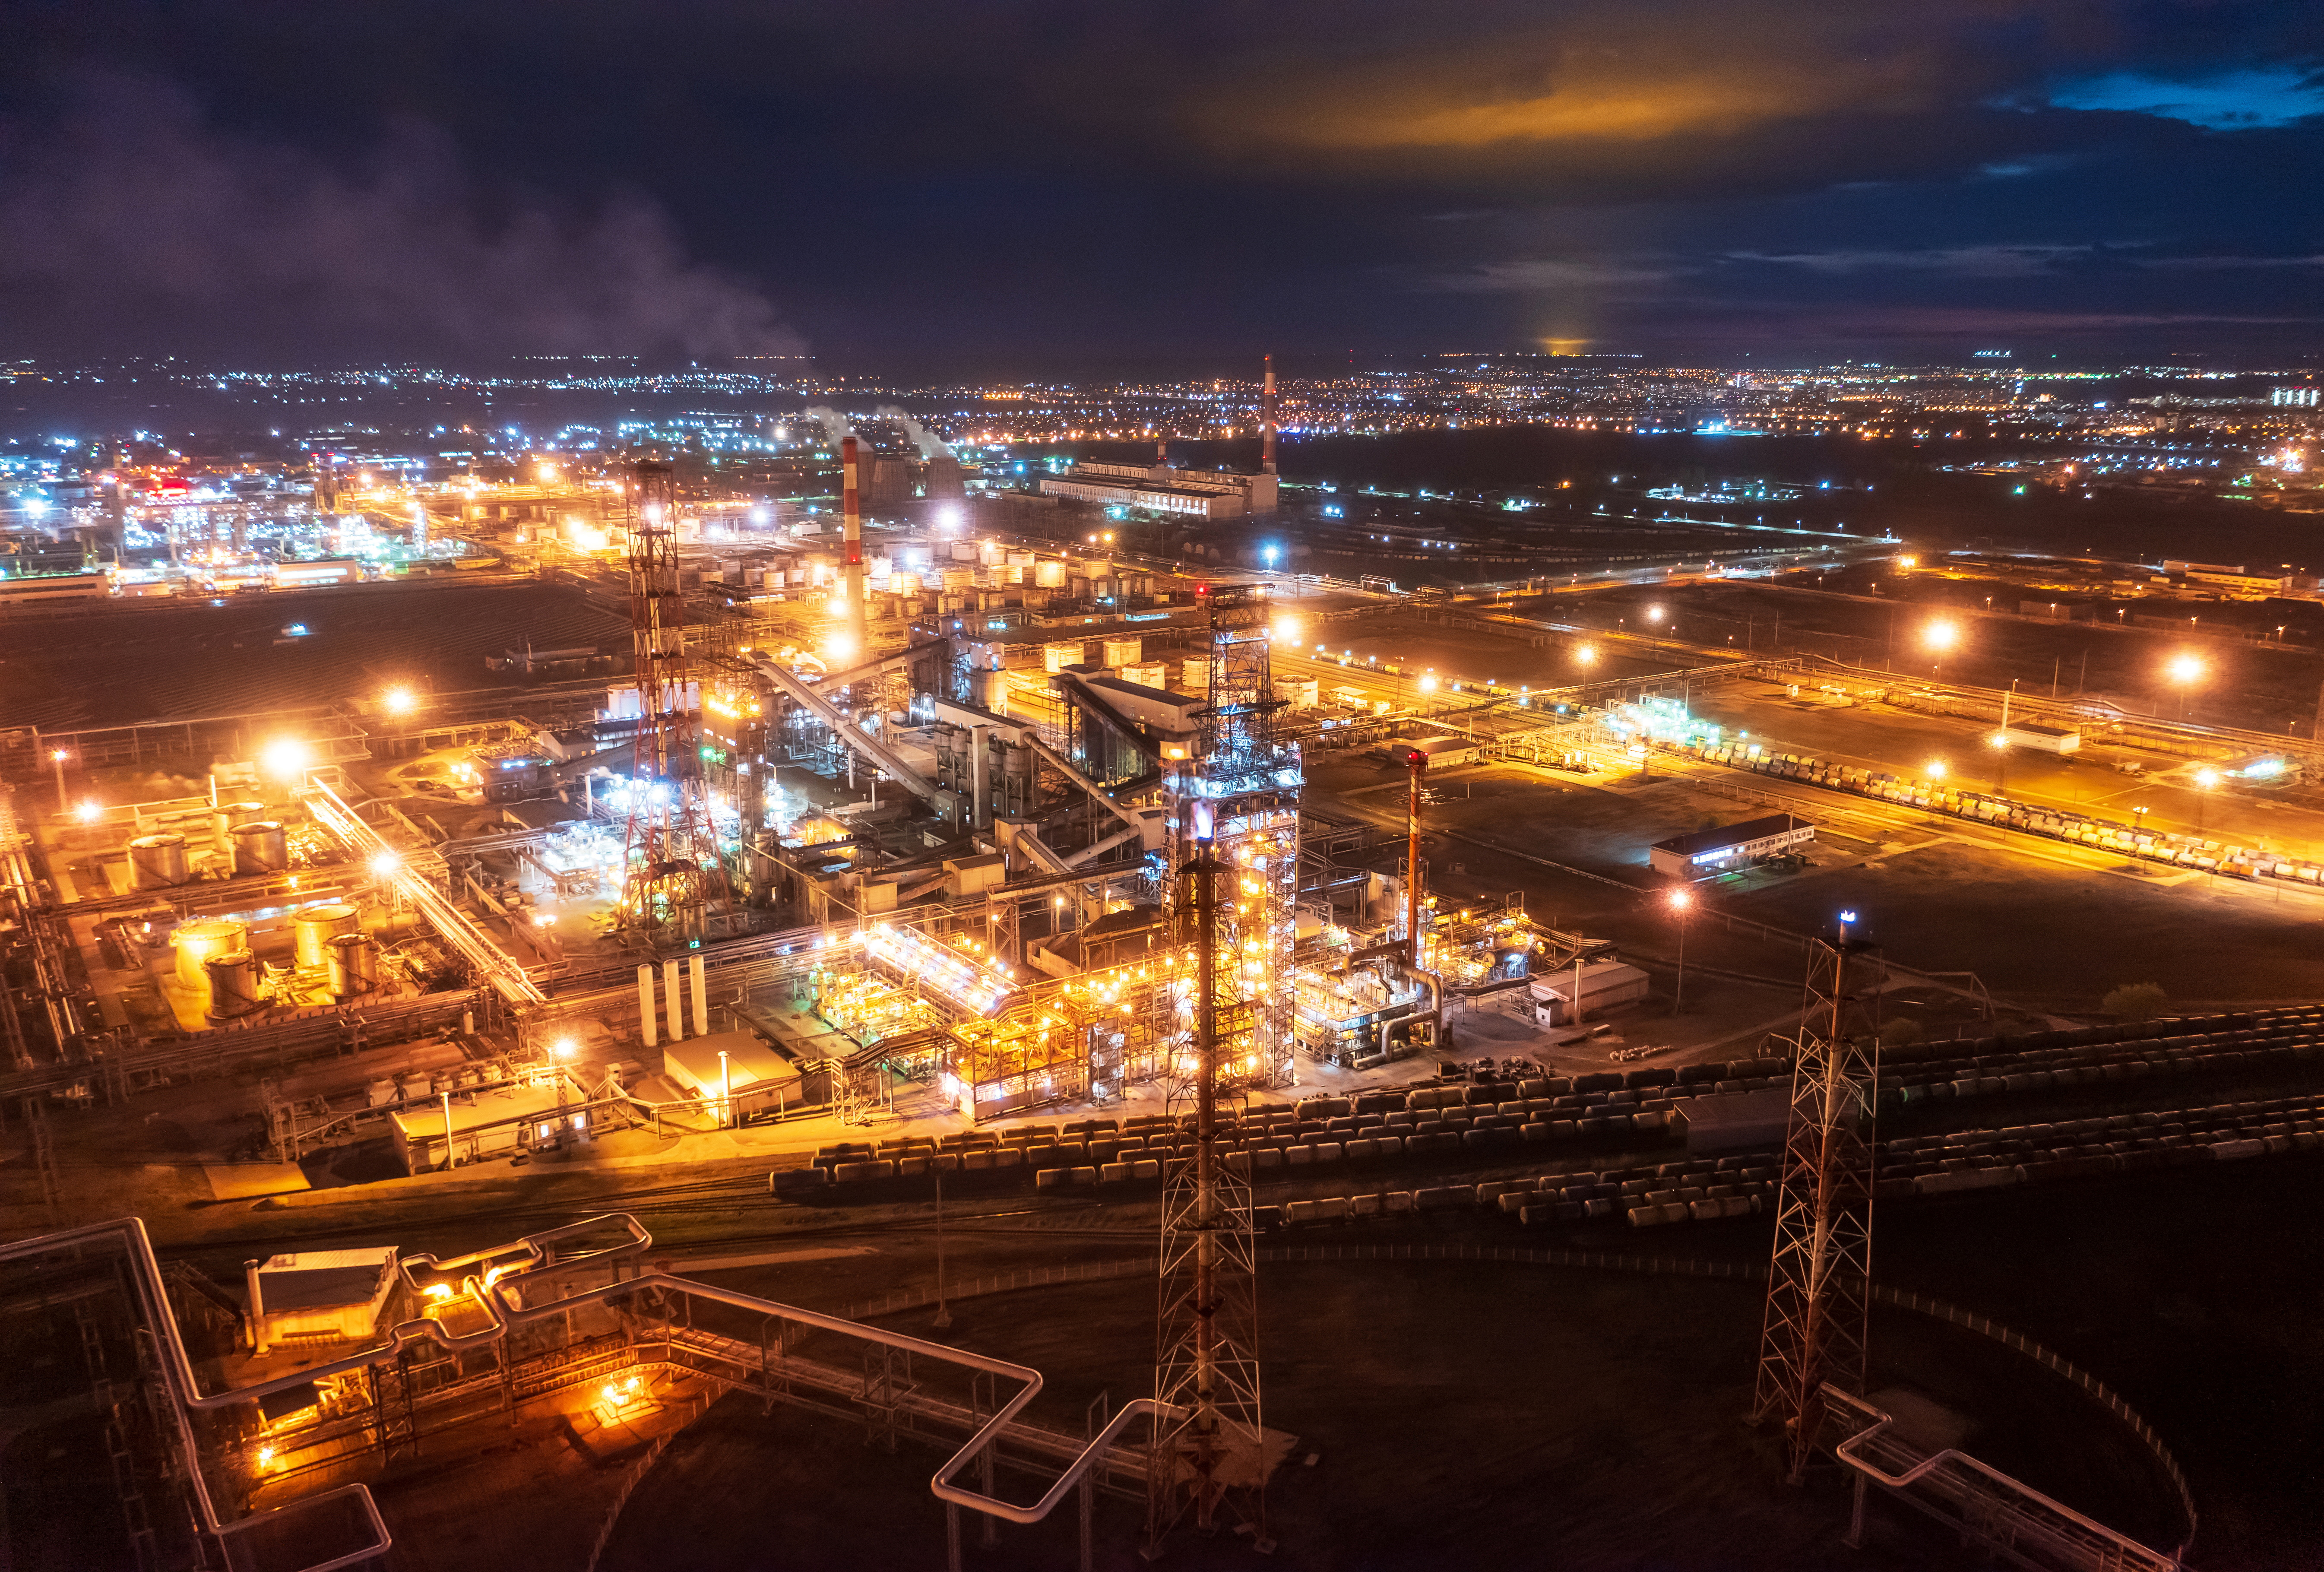 A general view shows the oil refinery of the Lukoil company in Volgograd